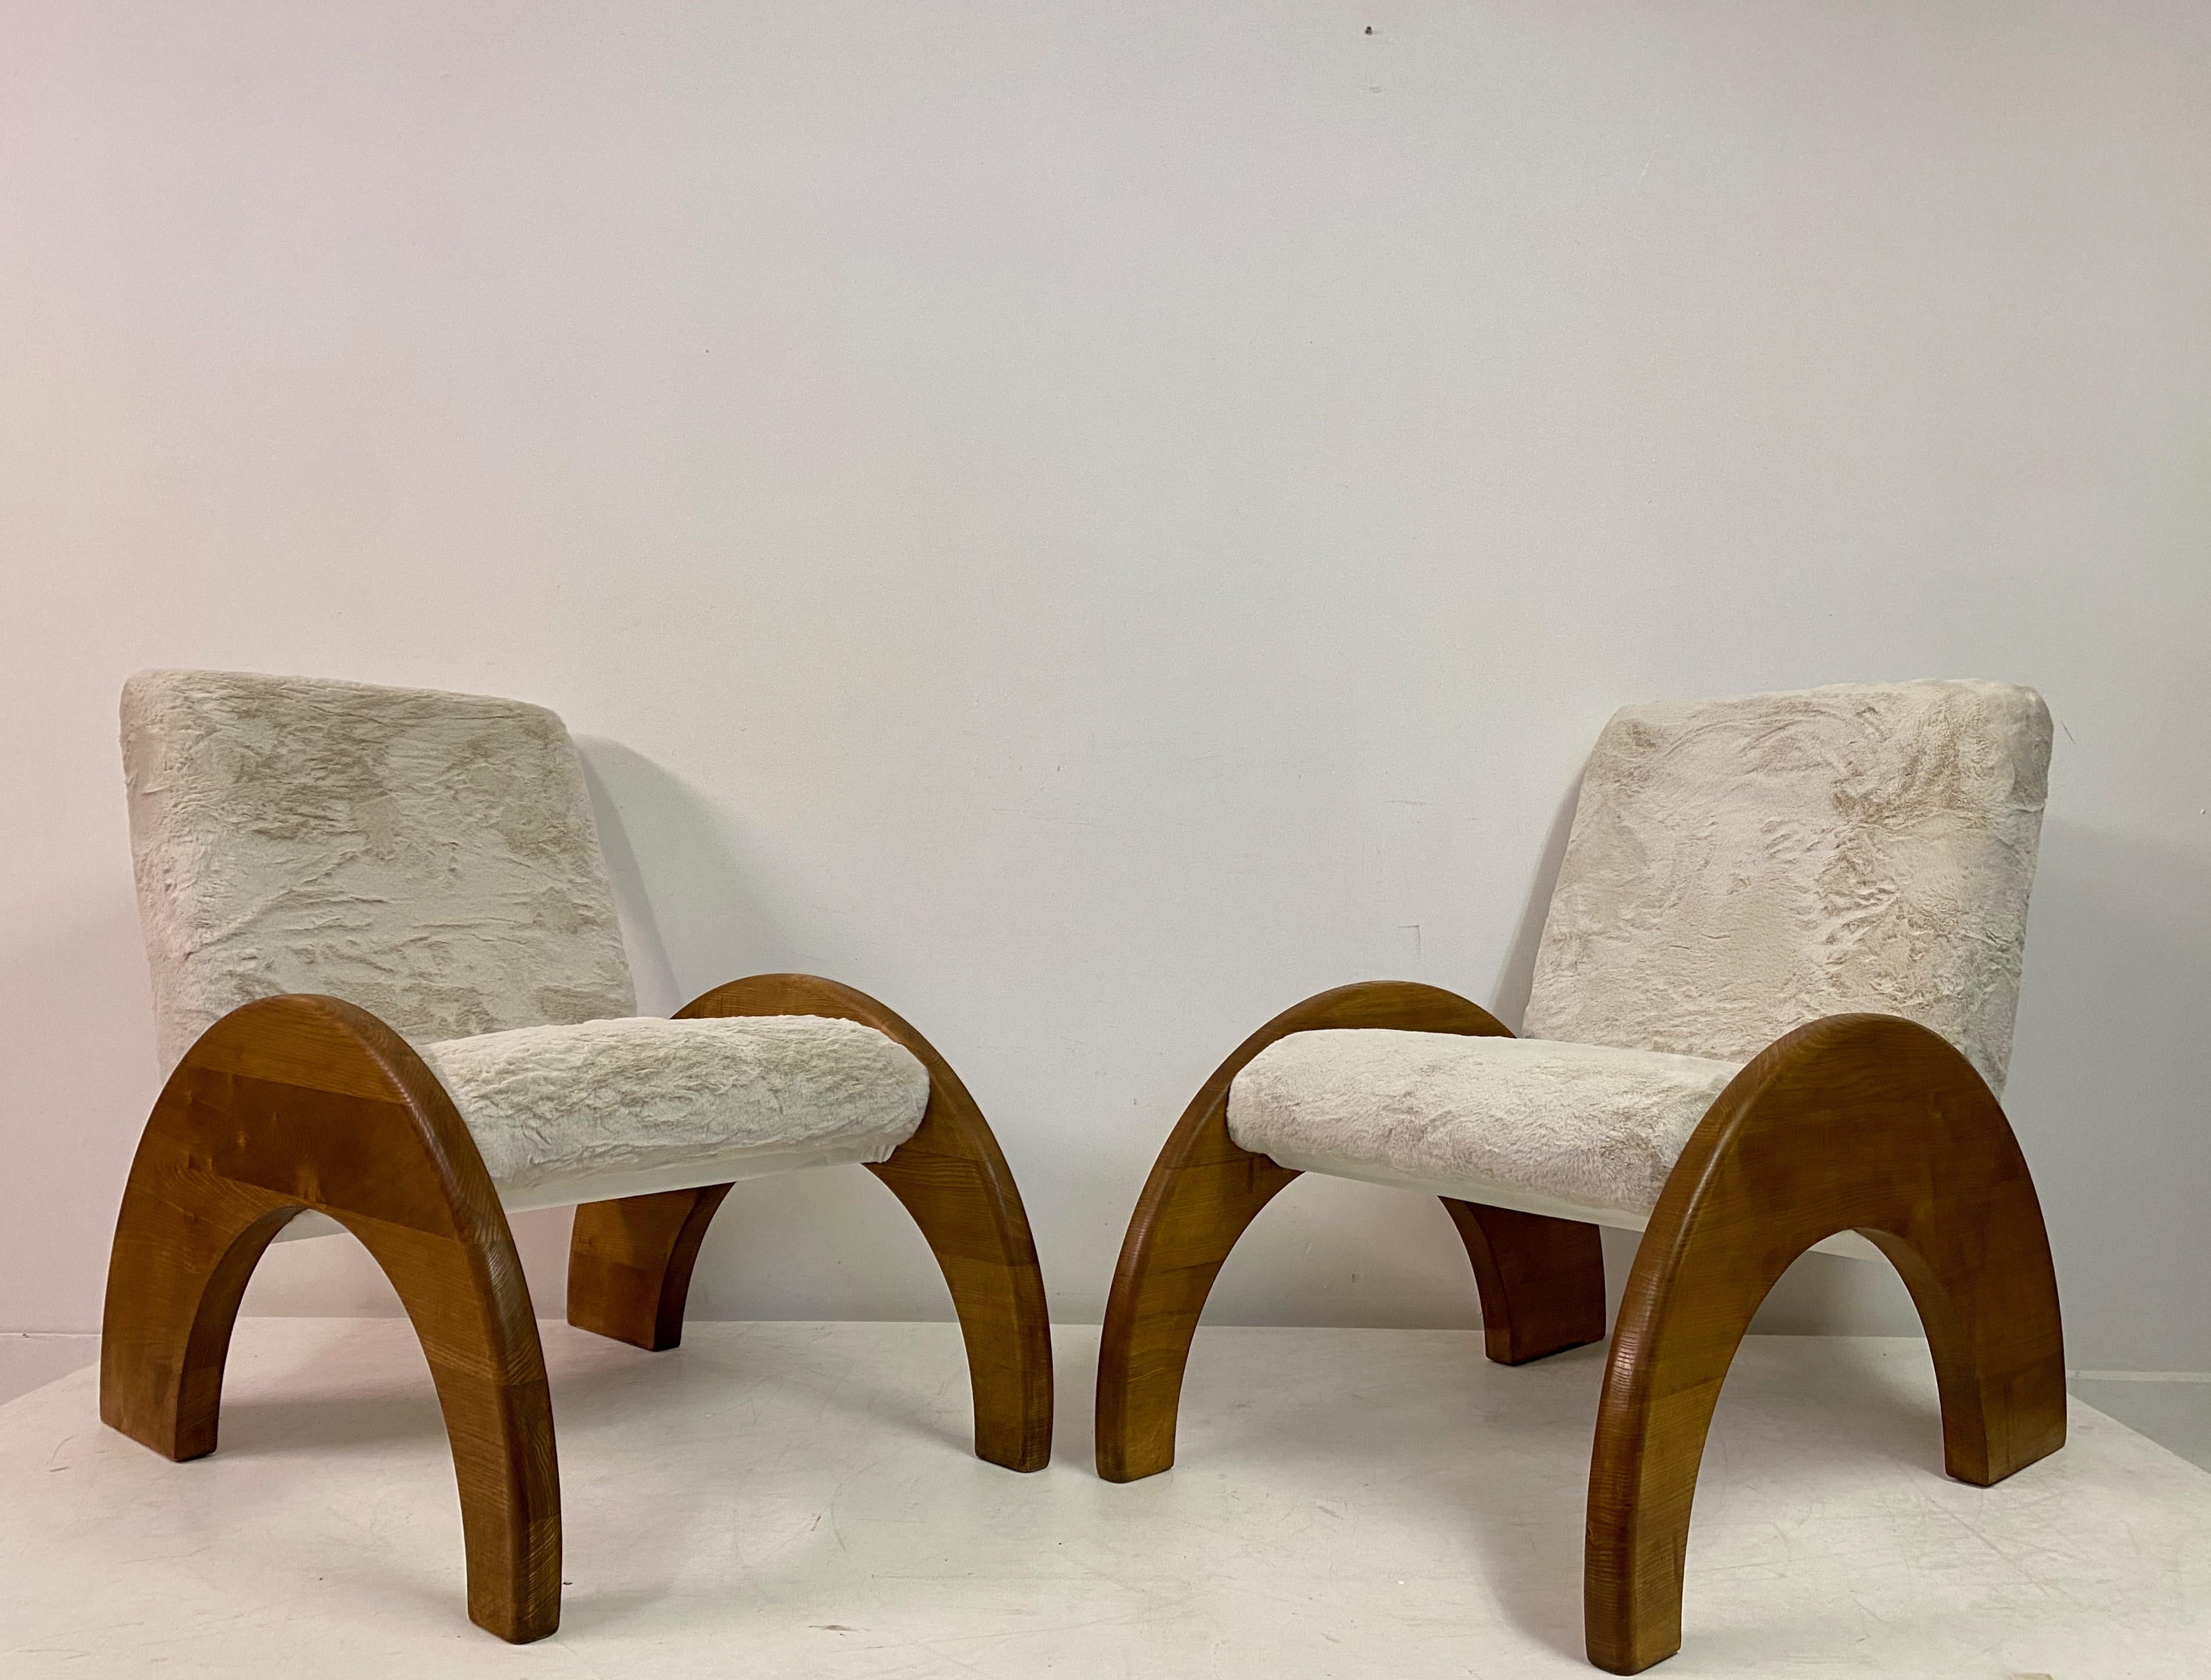 armchairs with wooden arms and legs